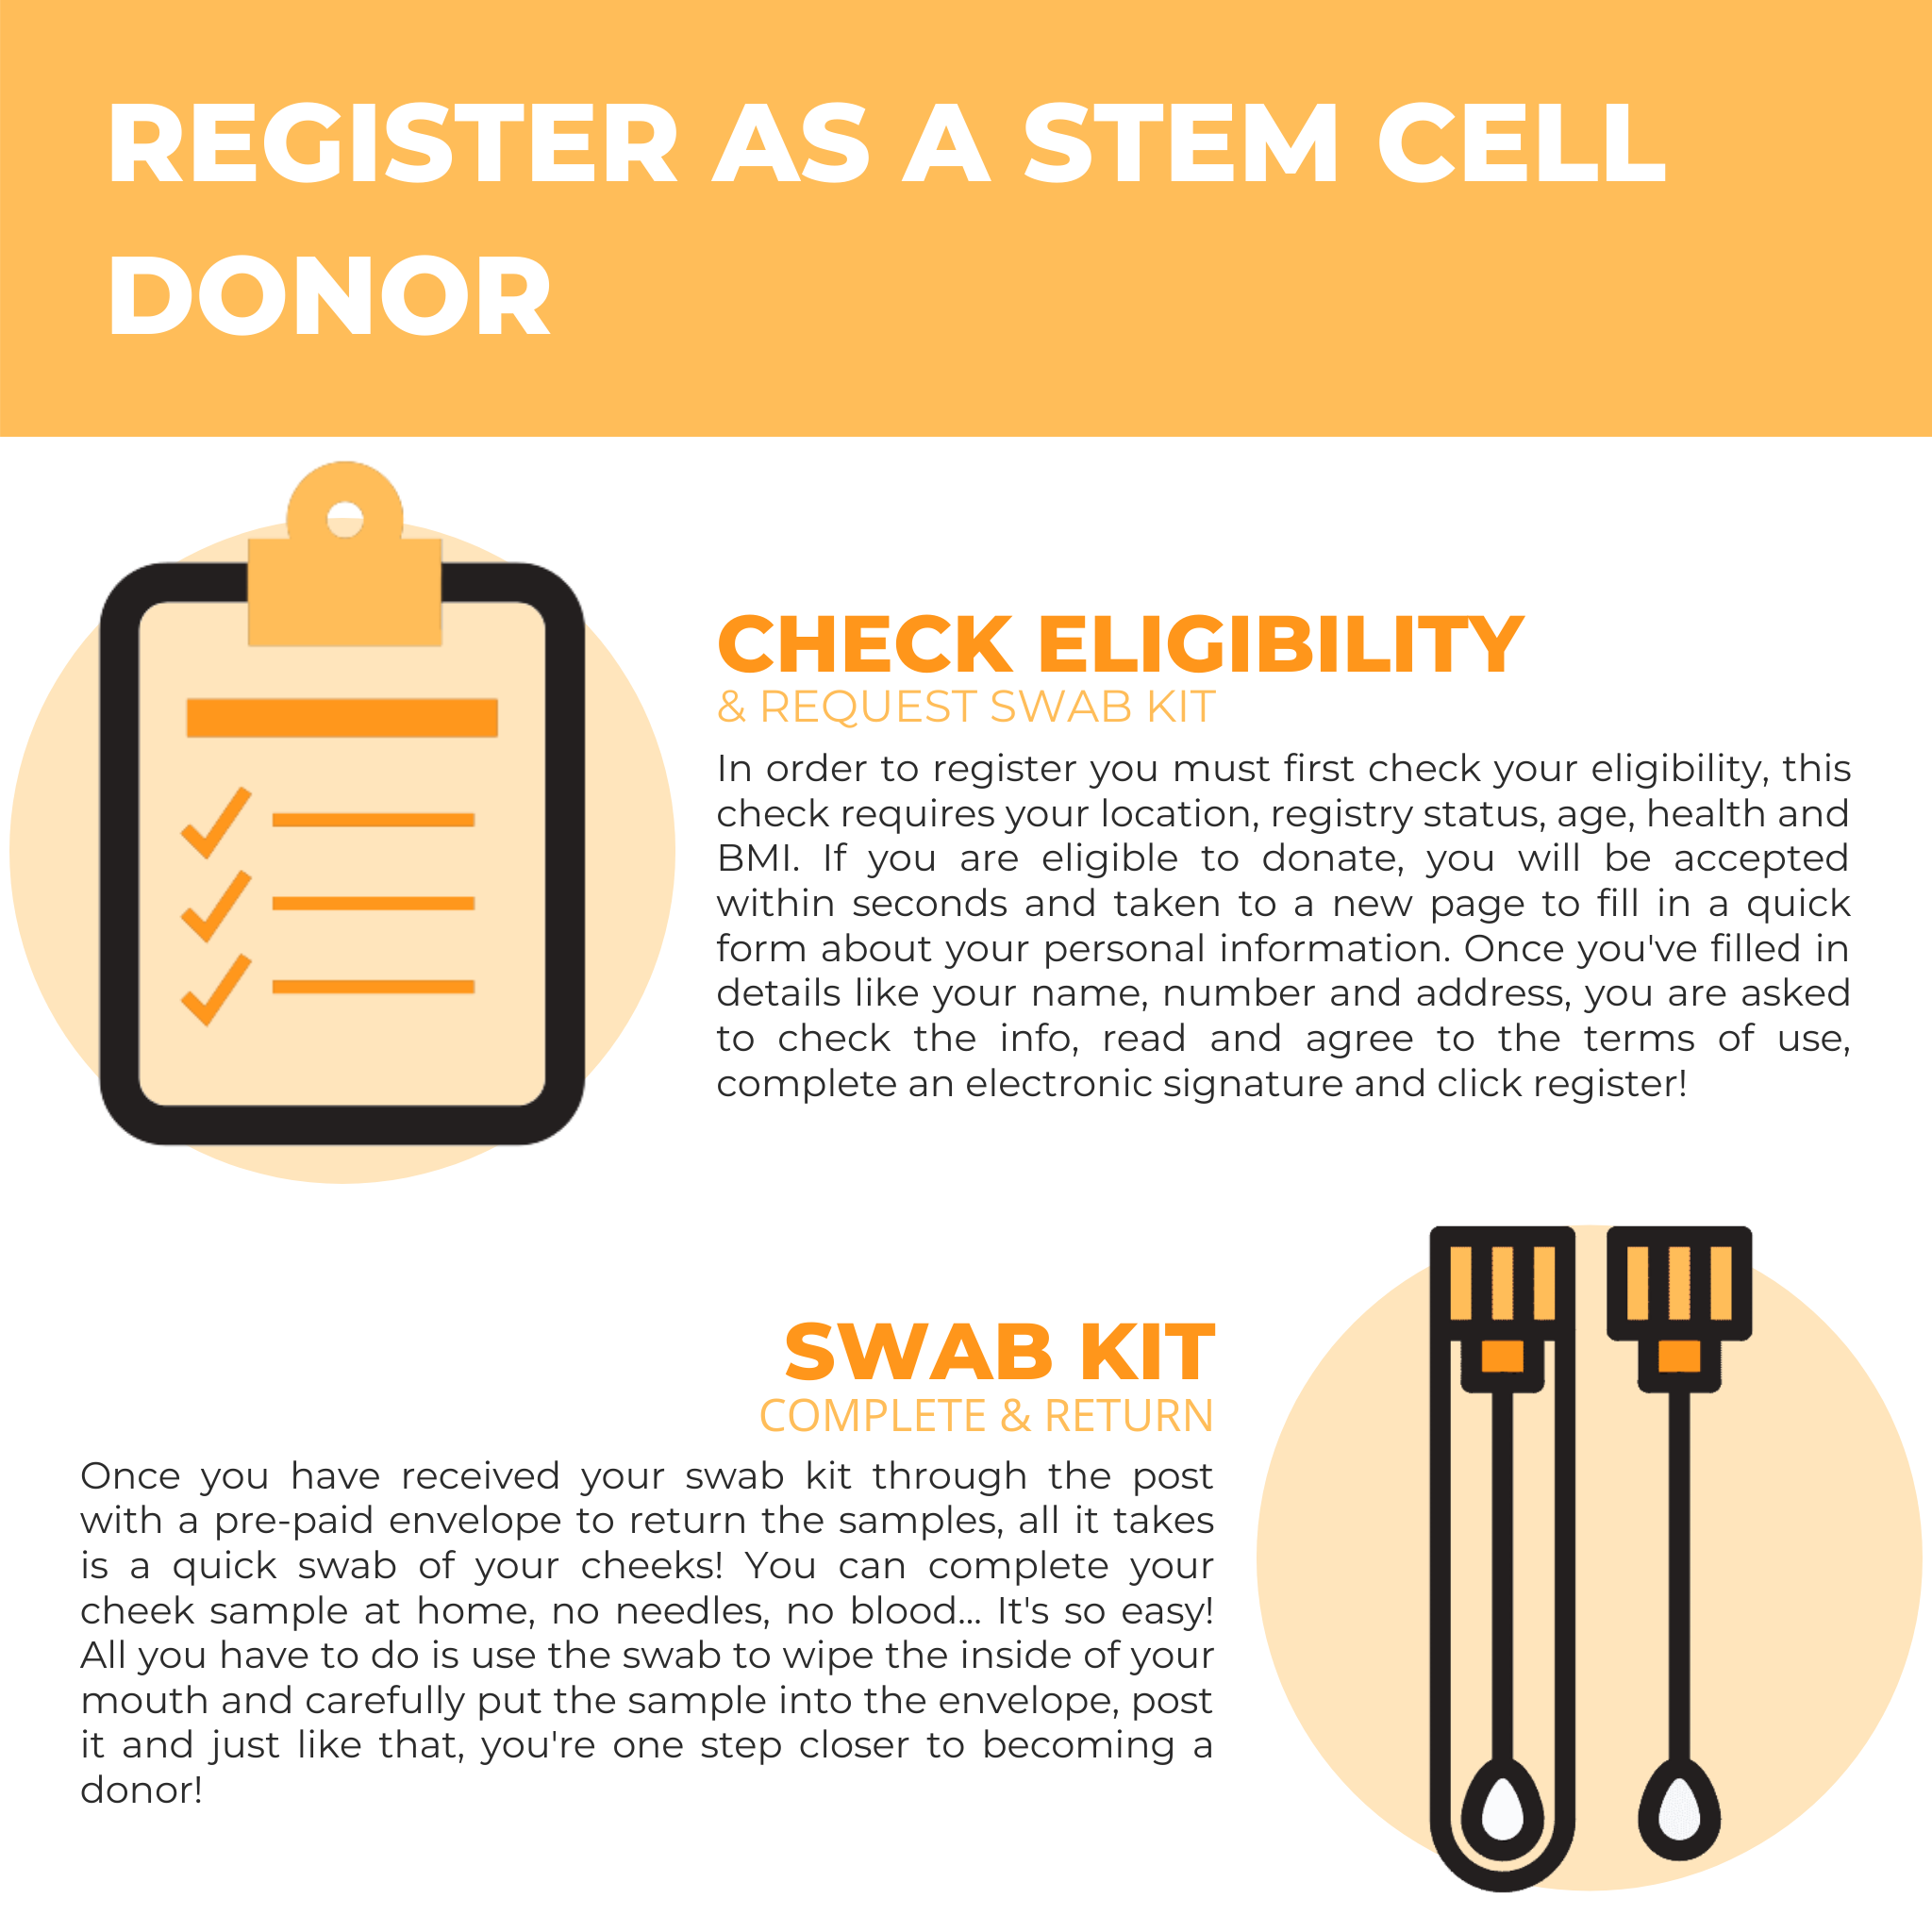 REGISTER AS A STEM CELL DONOR, Check Eligibility & Request Swab Kit, In order to register you must first check your eligibility, this check requires your location, registry status, age, health and BMI. If you are eligible to donate, you will be accepted within seconds and taken to a new page to fill in a quick form about your personal information. Once you've filled in details like your name, number and address, you are asked to check the info, read and agree to the terms of use, complete an electronic signature and click register!, Swab Kit, Complete & Return, Once you have received your swab kit through the post with a pre-paid envelope to return the samples, all it takes is a quick swab of your cheeks! You can complete your cheek sample at home, no needles, no blood... It's so easy! All you have to do is use the swab to wipe the inside of your mouth and carefully put the sample into the envelope, post it and just like that, you're one step closer to becoming a donor!, Drum Shop, DSUK, DKMS, Blood Cancer